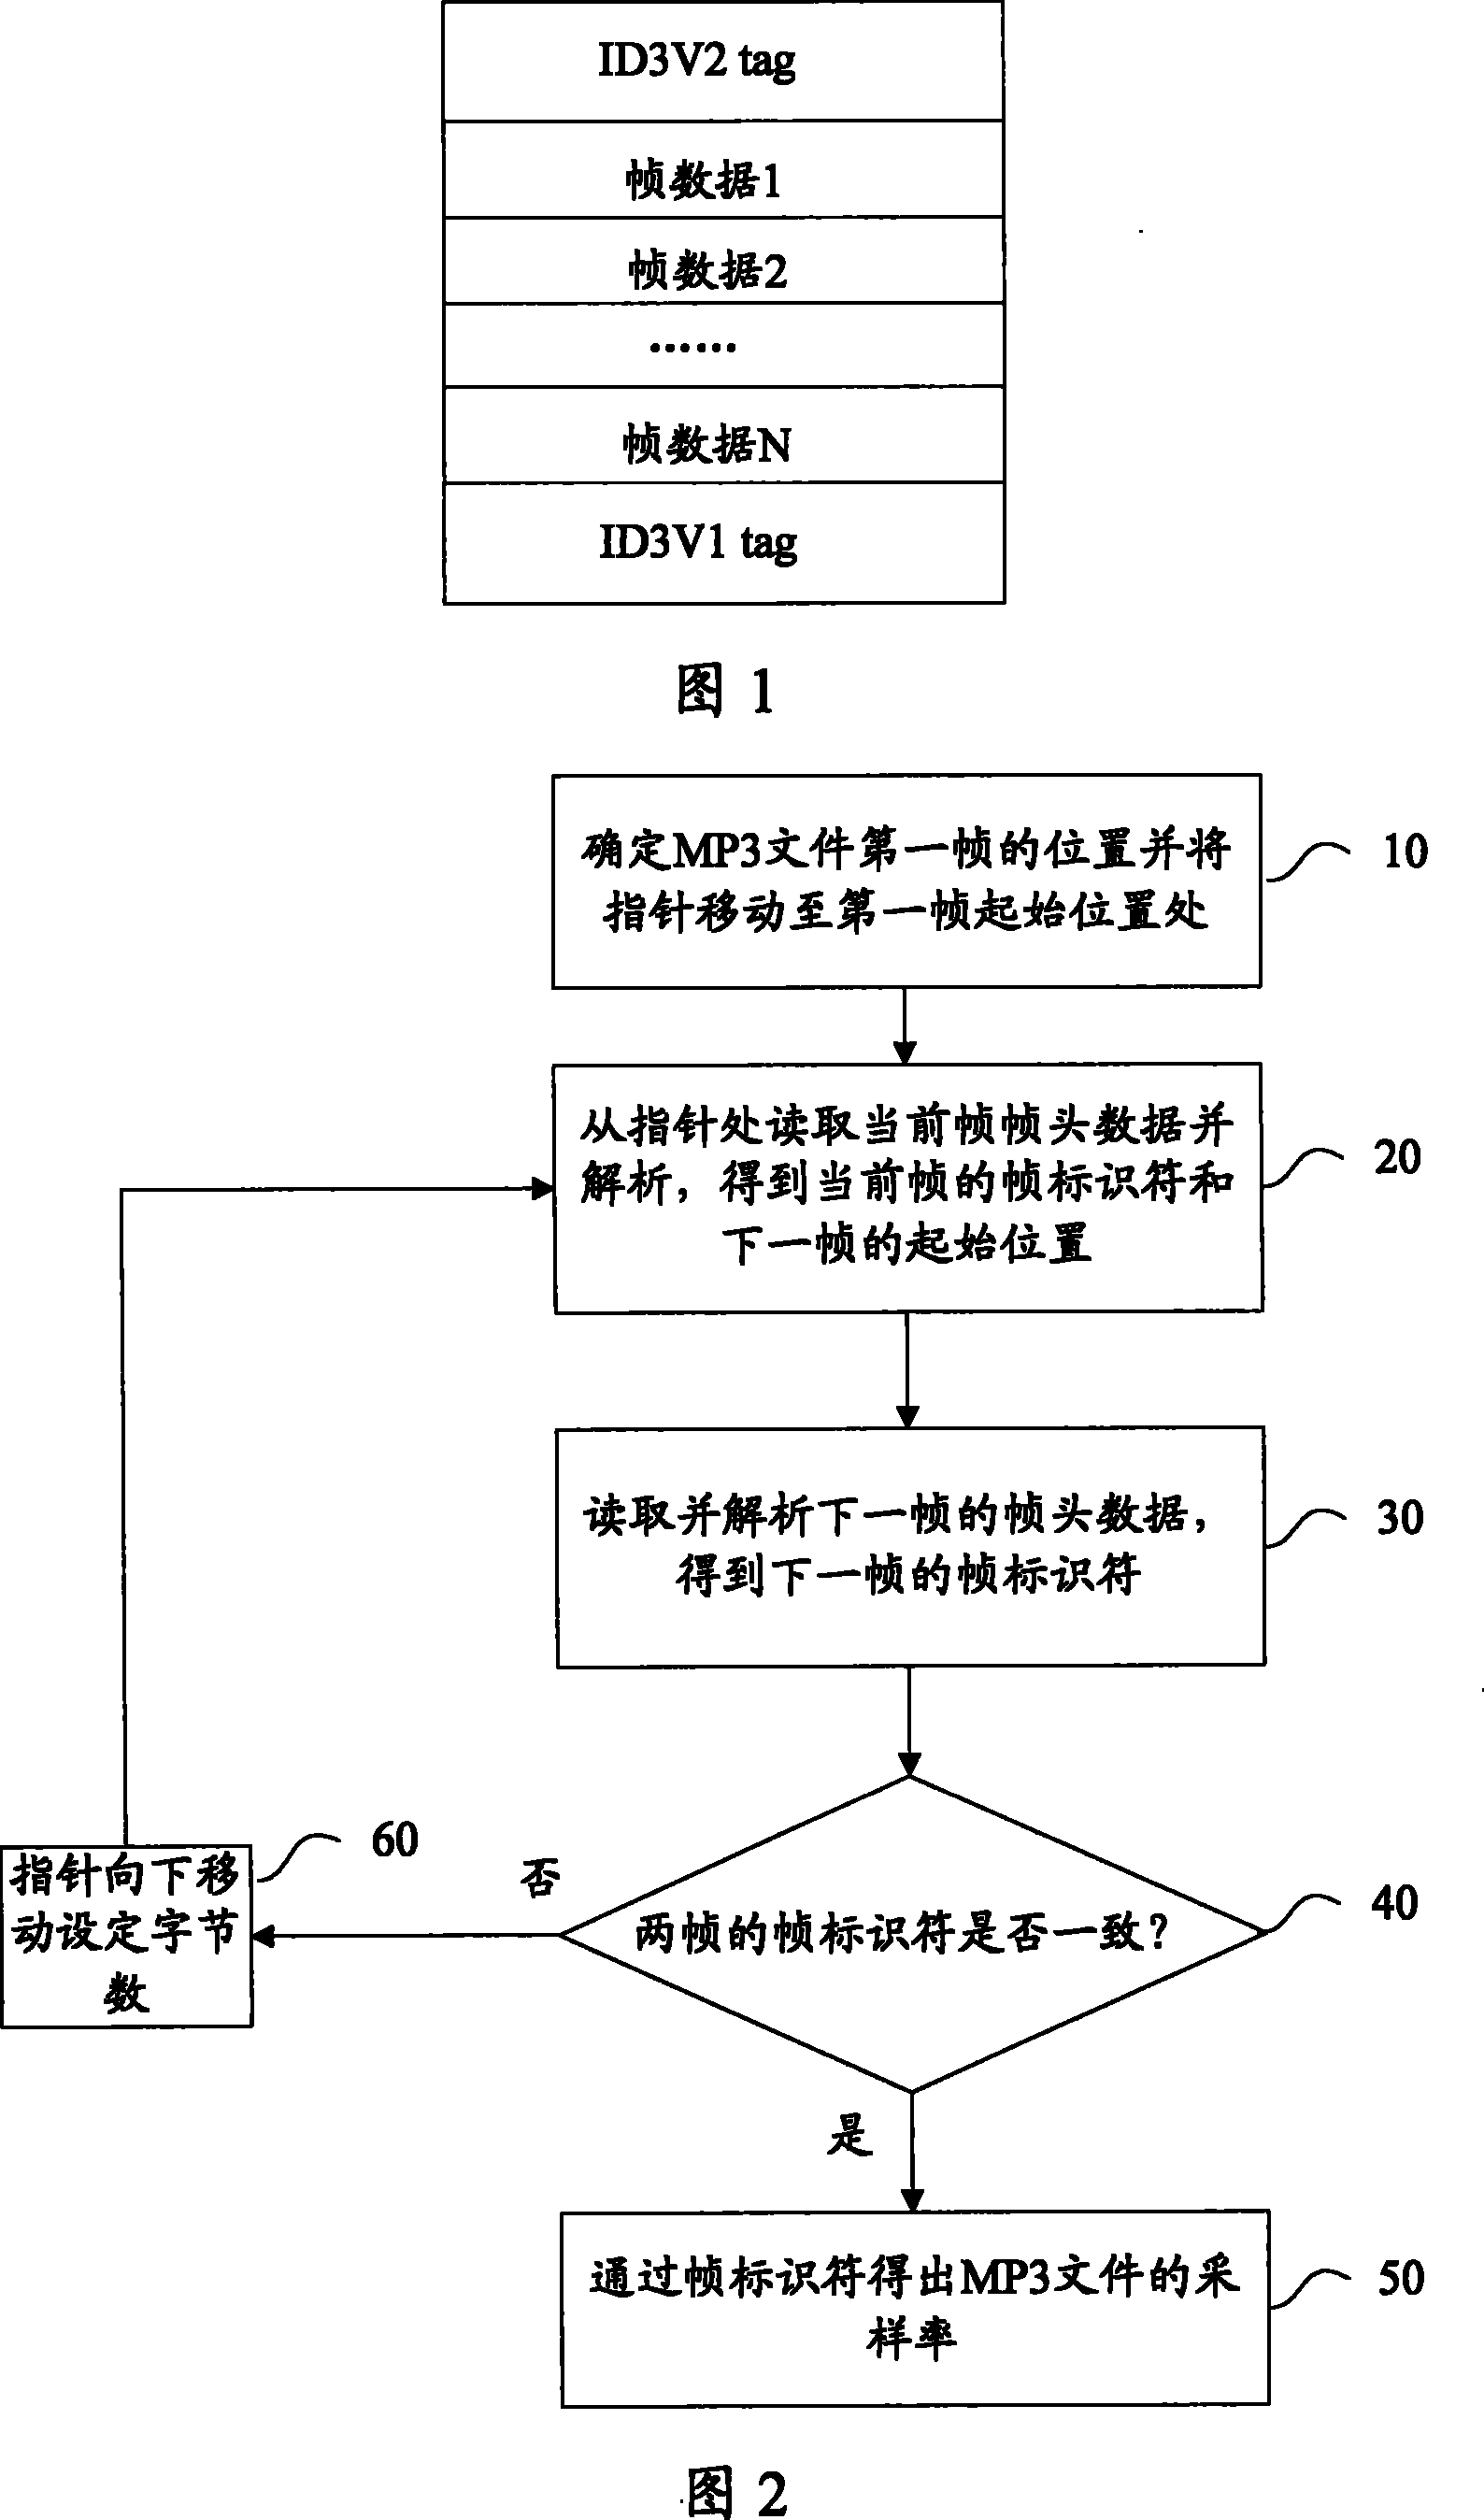 Method and apparatus for extracting MP3 file sampling rate